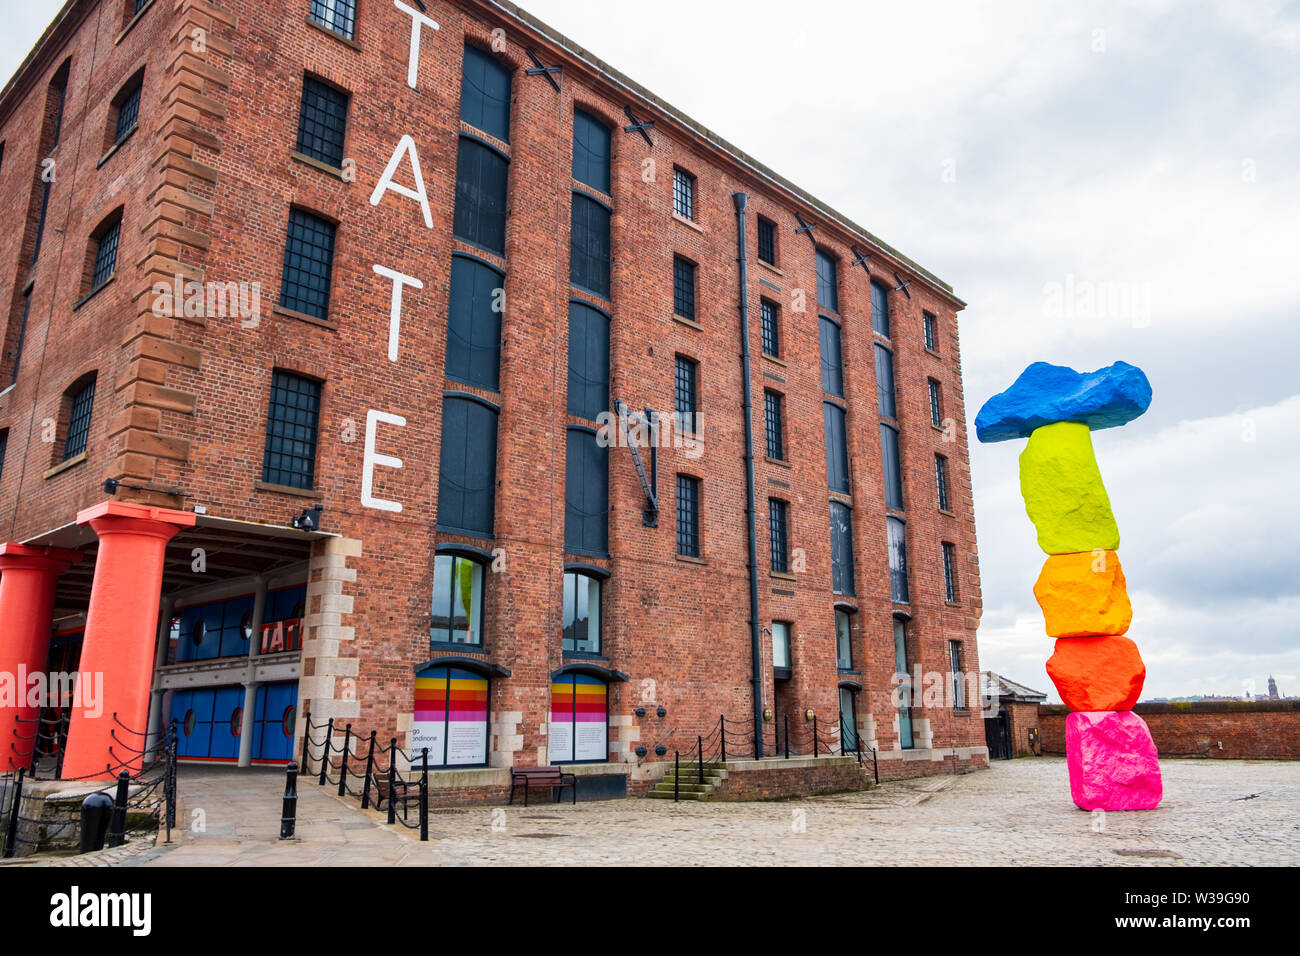 Liverpool, United Kingdom - April 26, 2019: Exterior of Tate Liverpool art gallery in the Albert Dock Area in Liverpool, Merseyside, with a sculpture Stock Photo